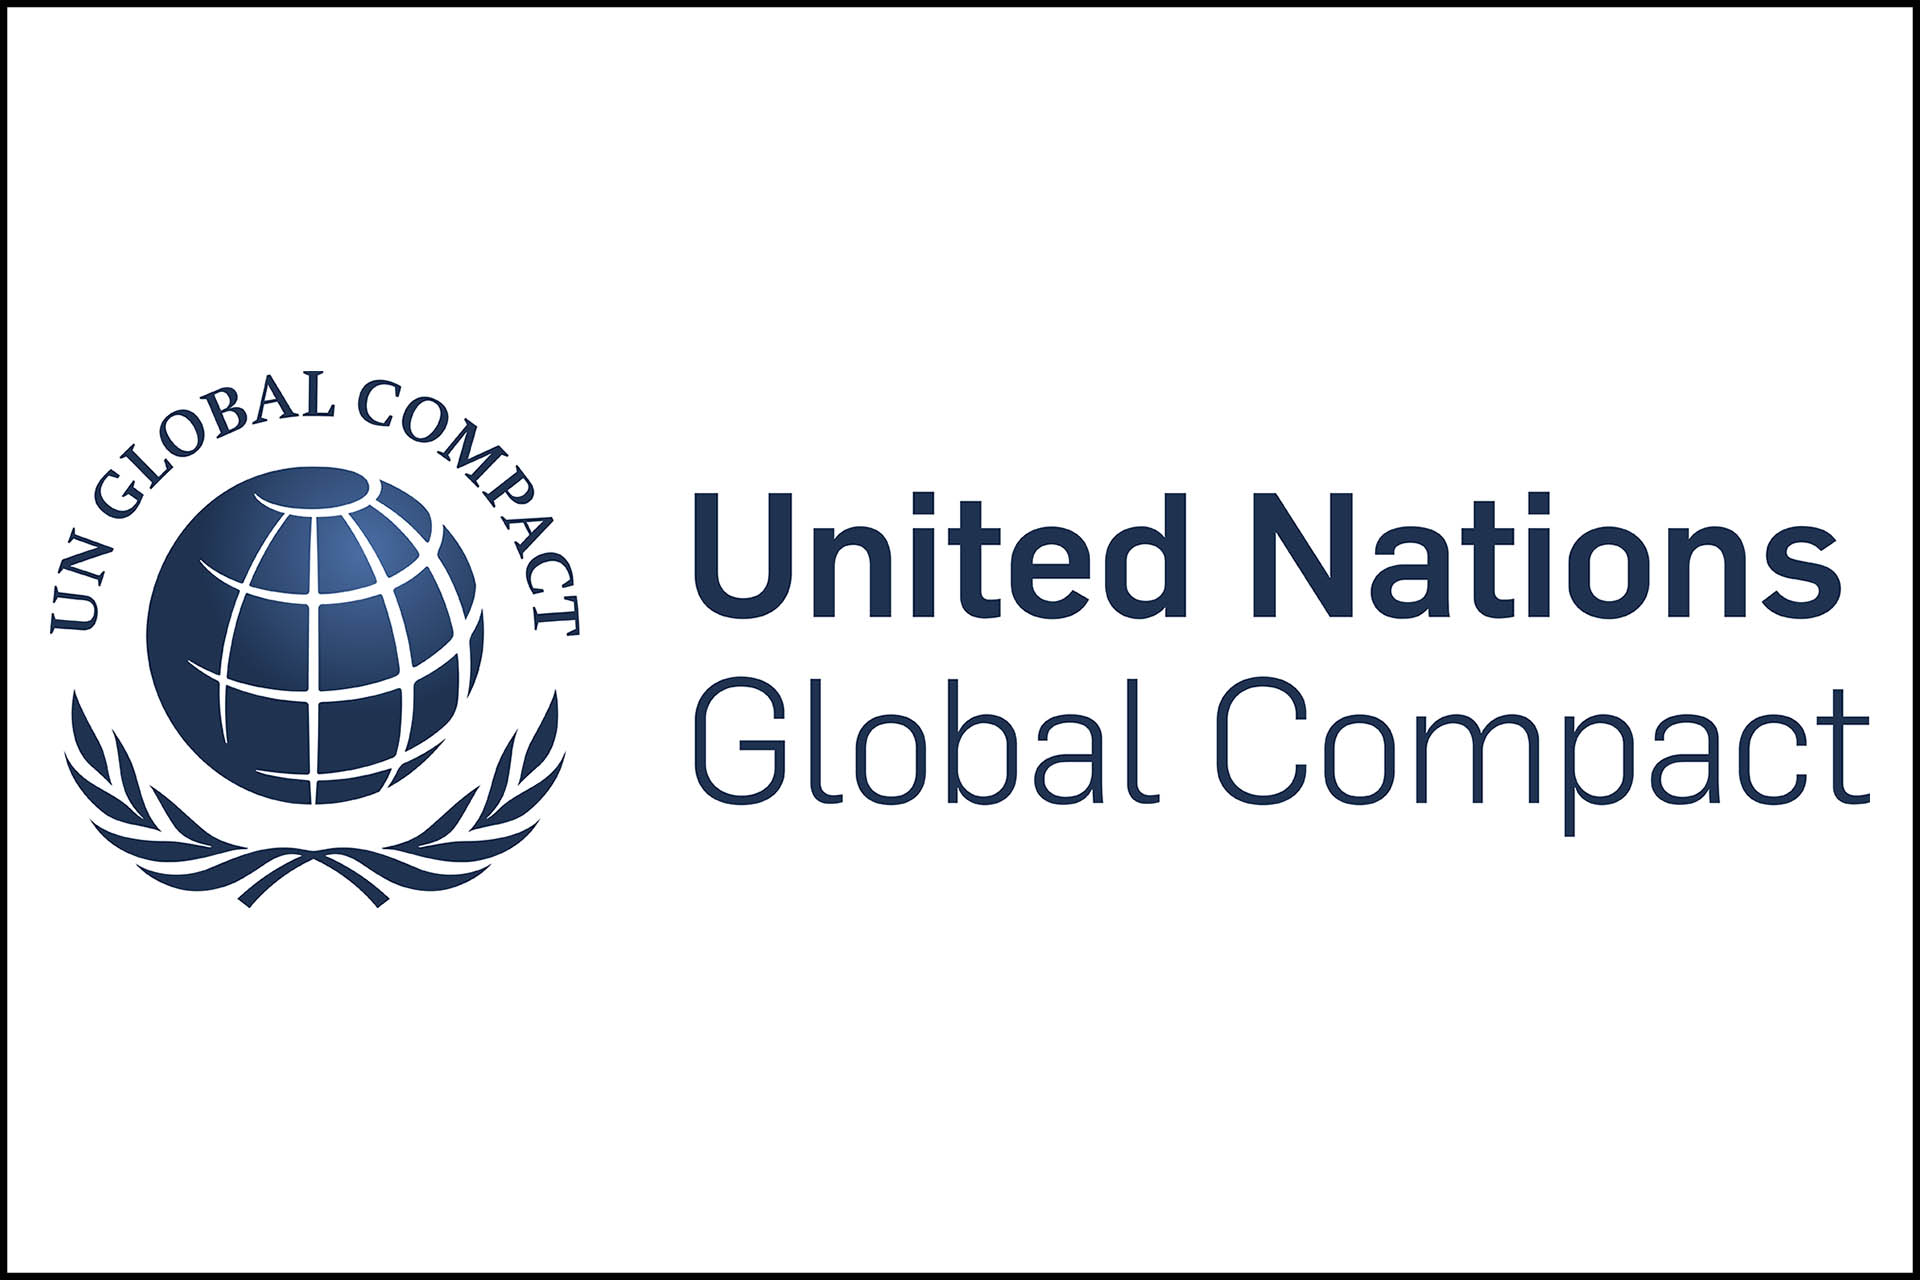 REV Ocean has been accepted as a Signatory of the United Nations Global Compact